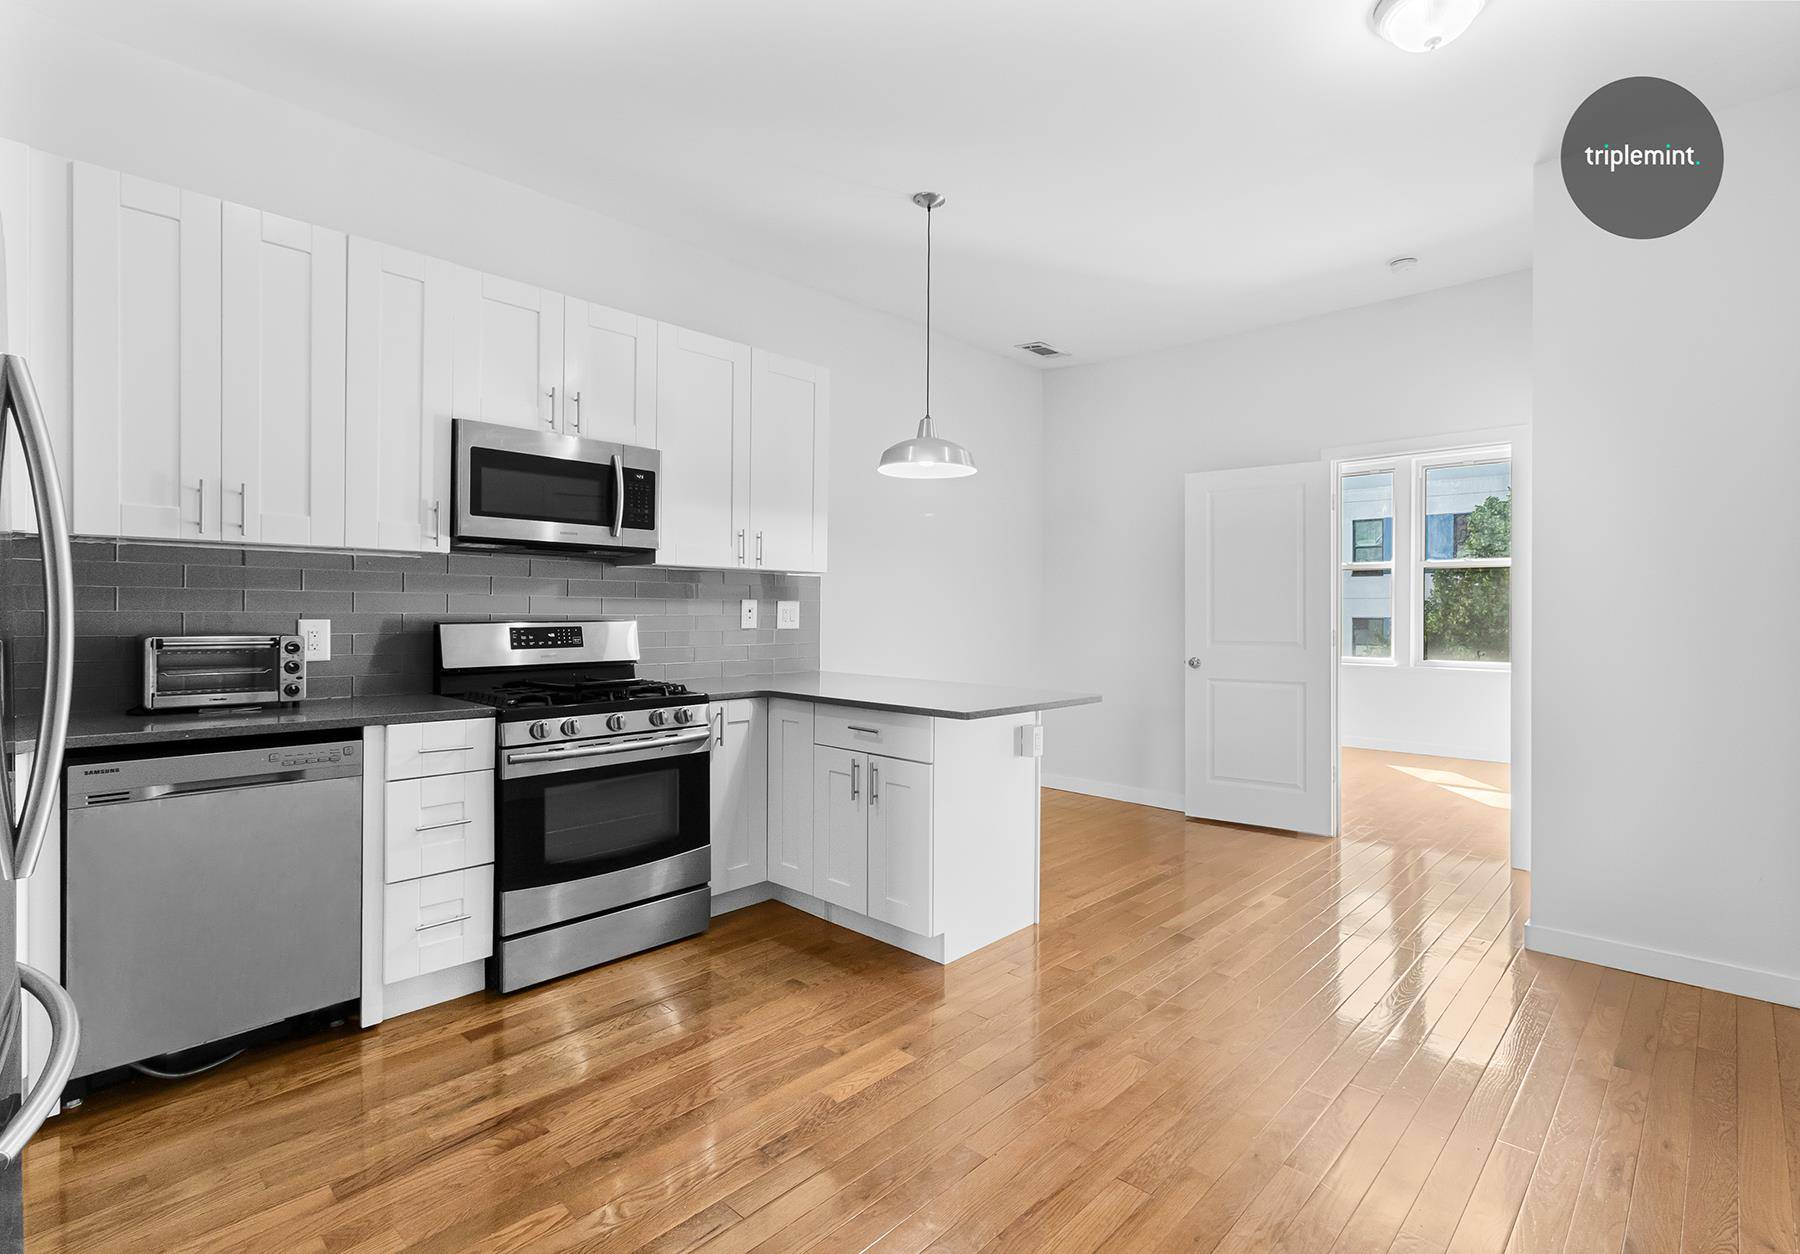 Great 3BR flex 4BR Gorgeous kitchen with plenty of counter space Hardwood floors throughout the apartment Fully modern tiled Bathroom CENTRAL AC Washer and dryer in building Renovated and well ...